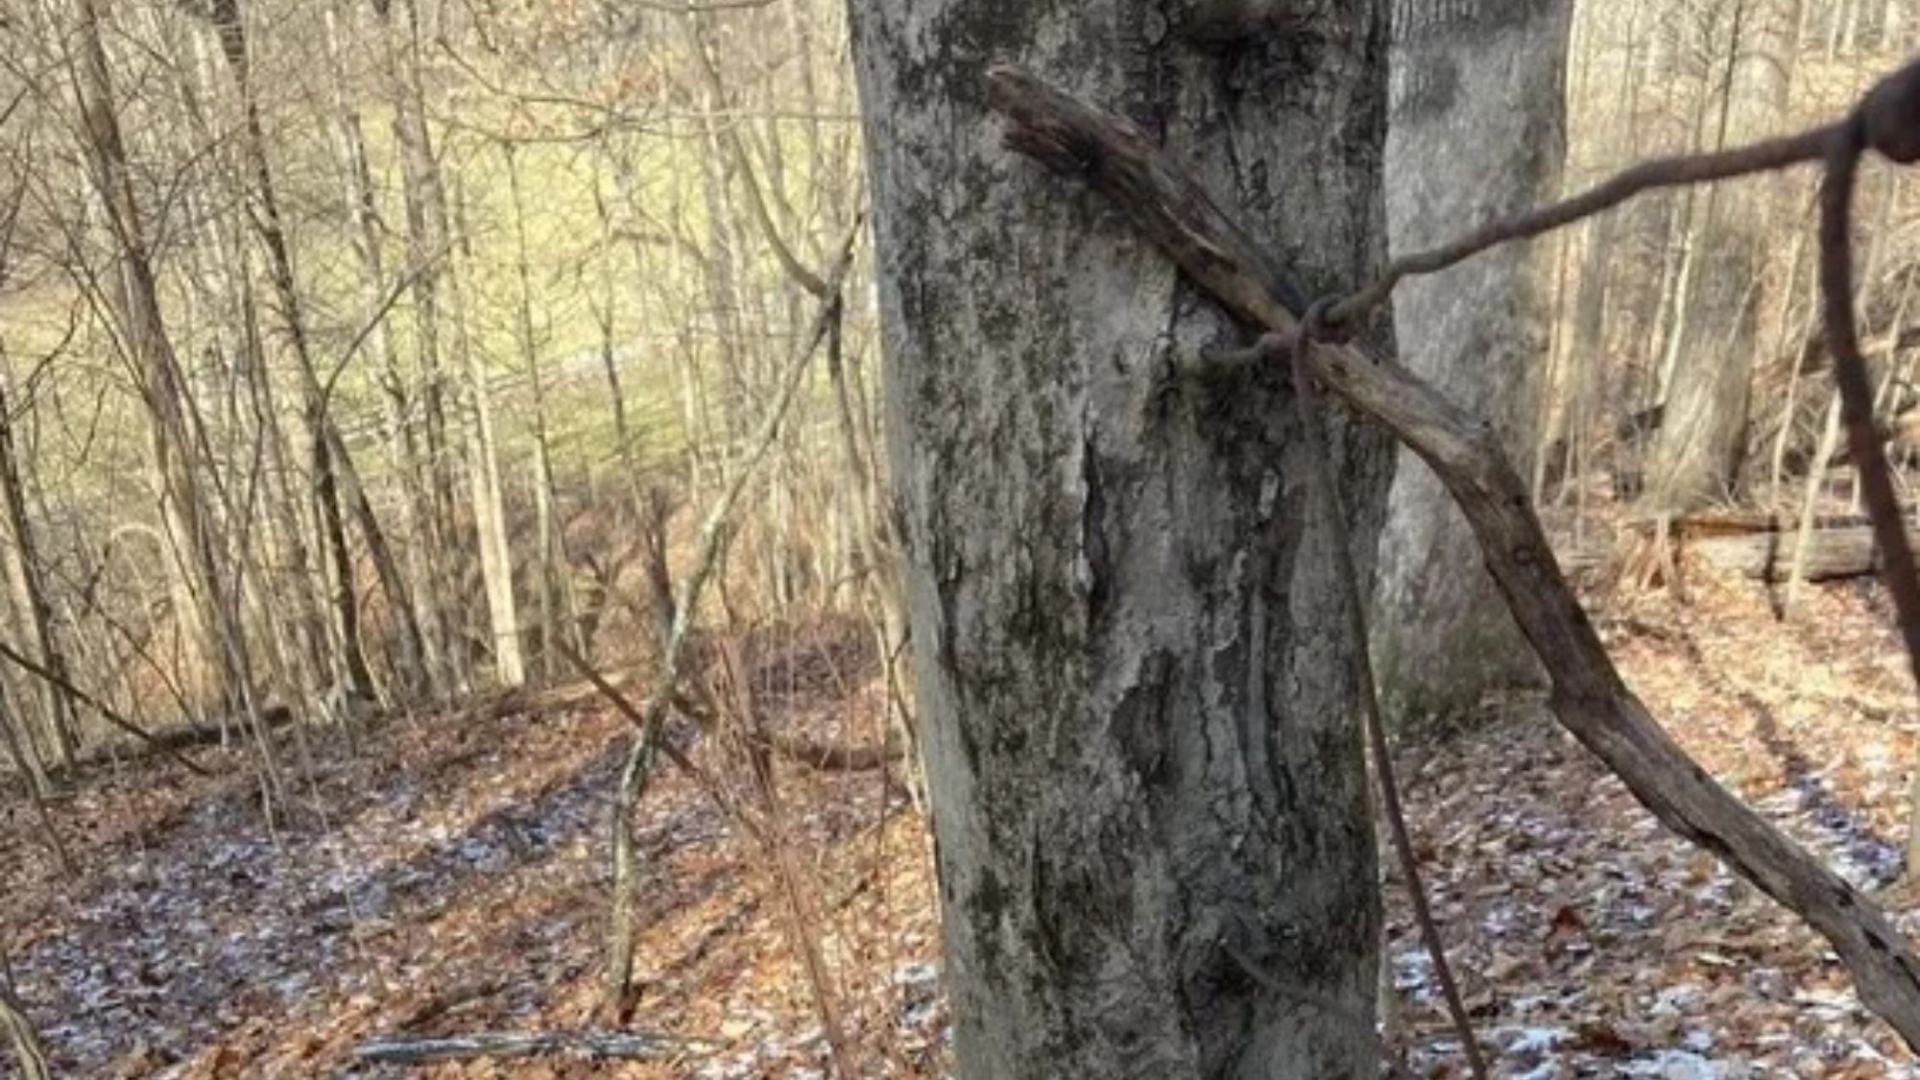 You could go crazy trying to spot the corgi playing hide-and-seek in the woods in this image in less than 30 seconds.